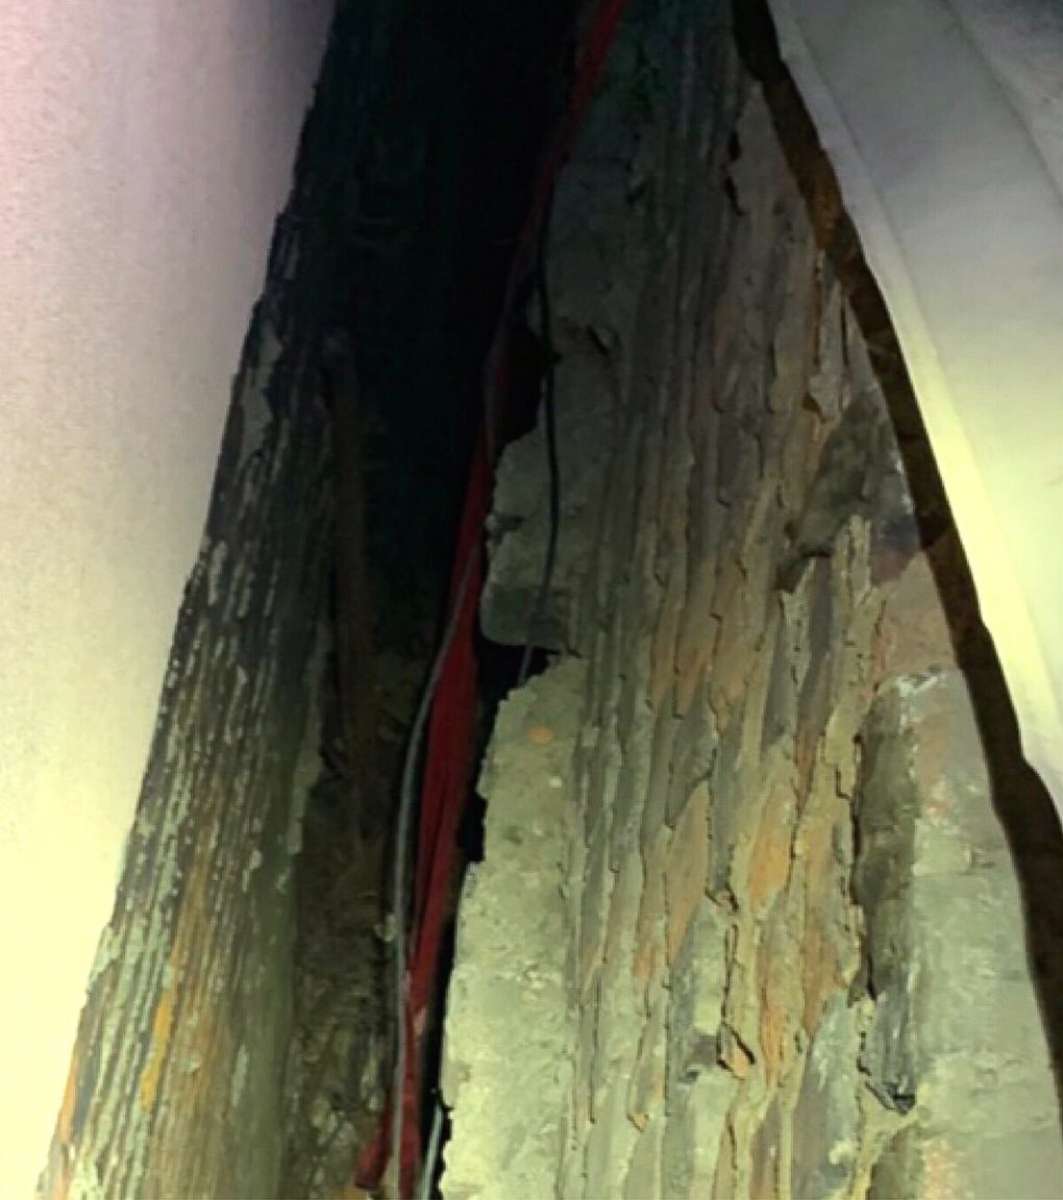 PHOTO: Police in New York shared an image of the space between two buildings after a trapped woman was rescued after falling into the gap on Dec. 29, 2019.